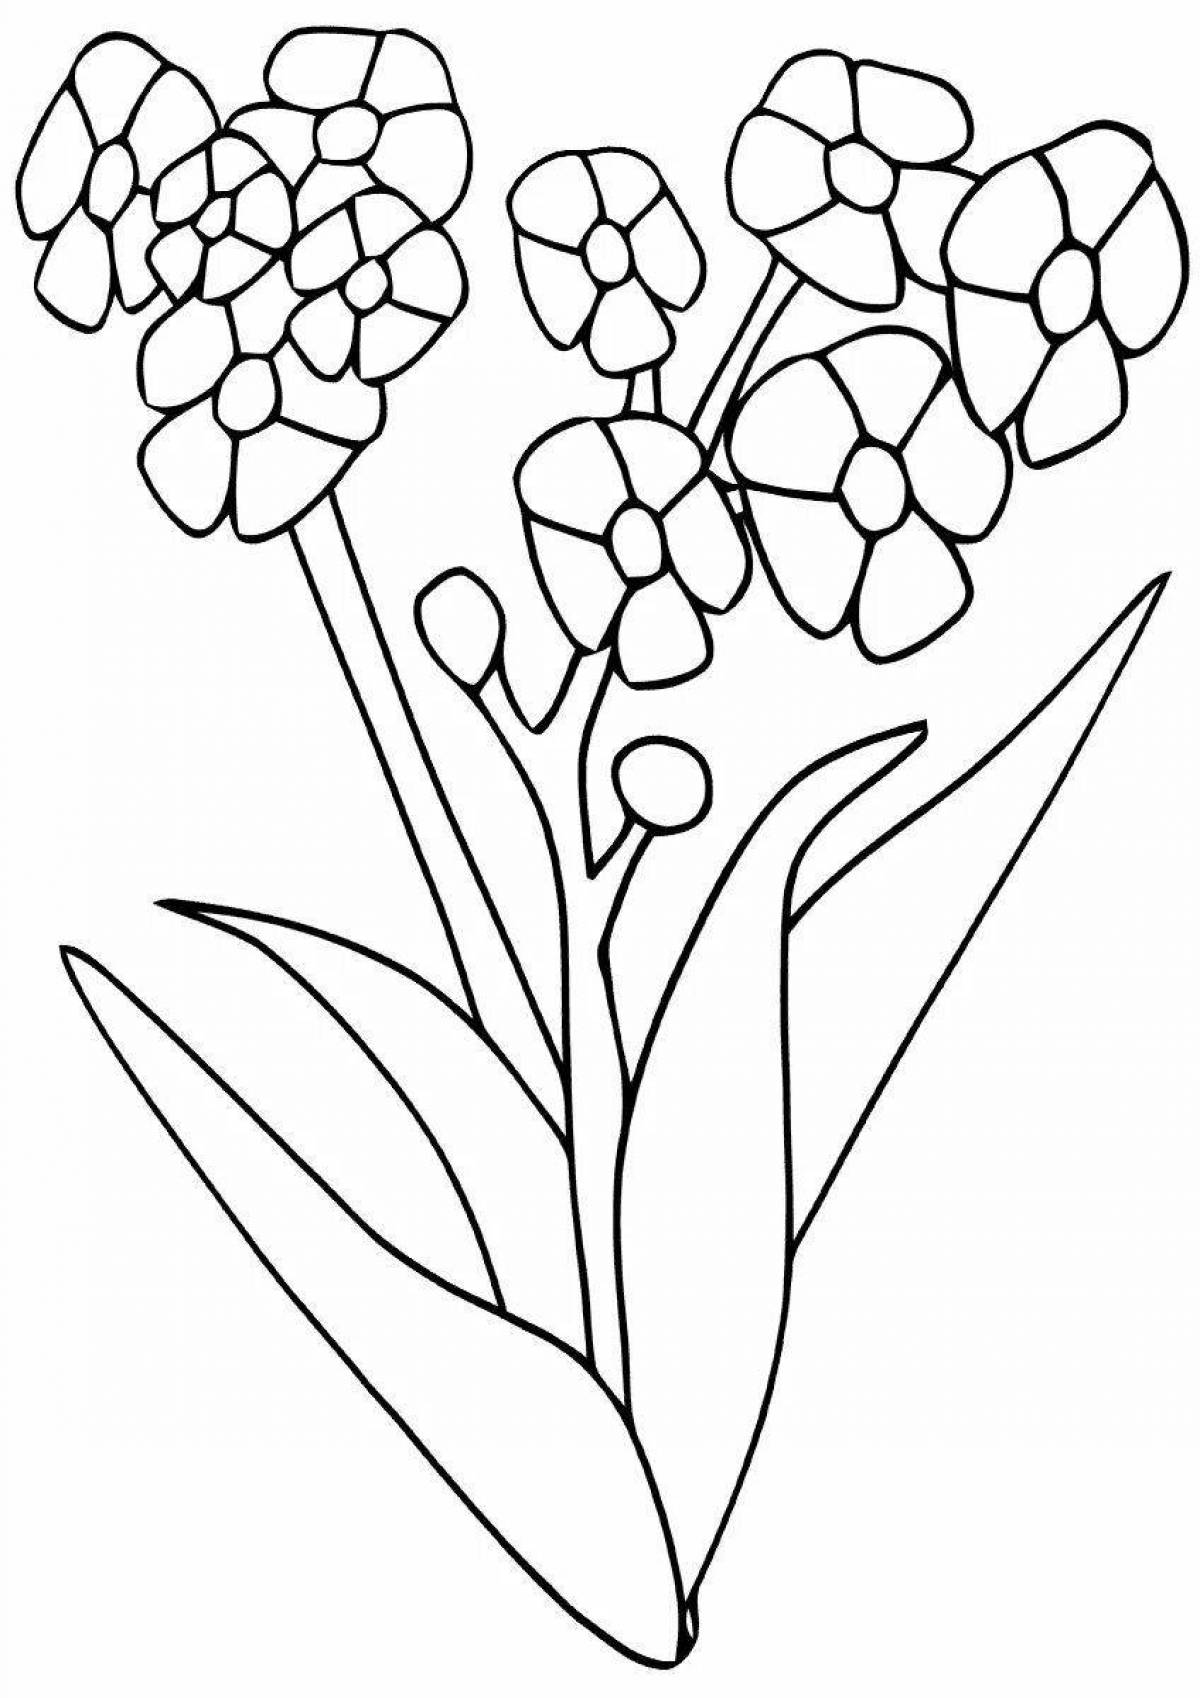 Fancy forget-me-not coloring page